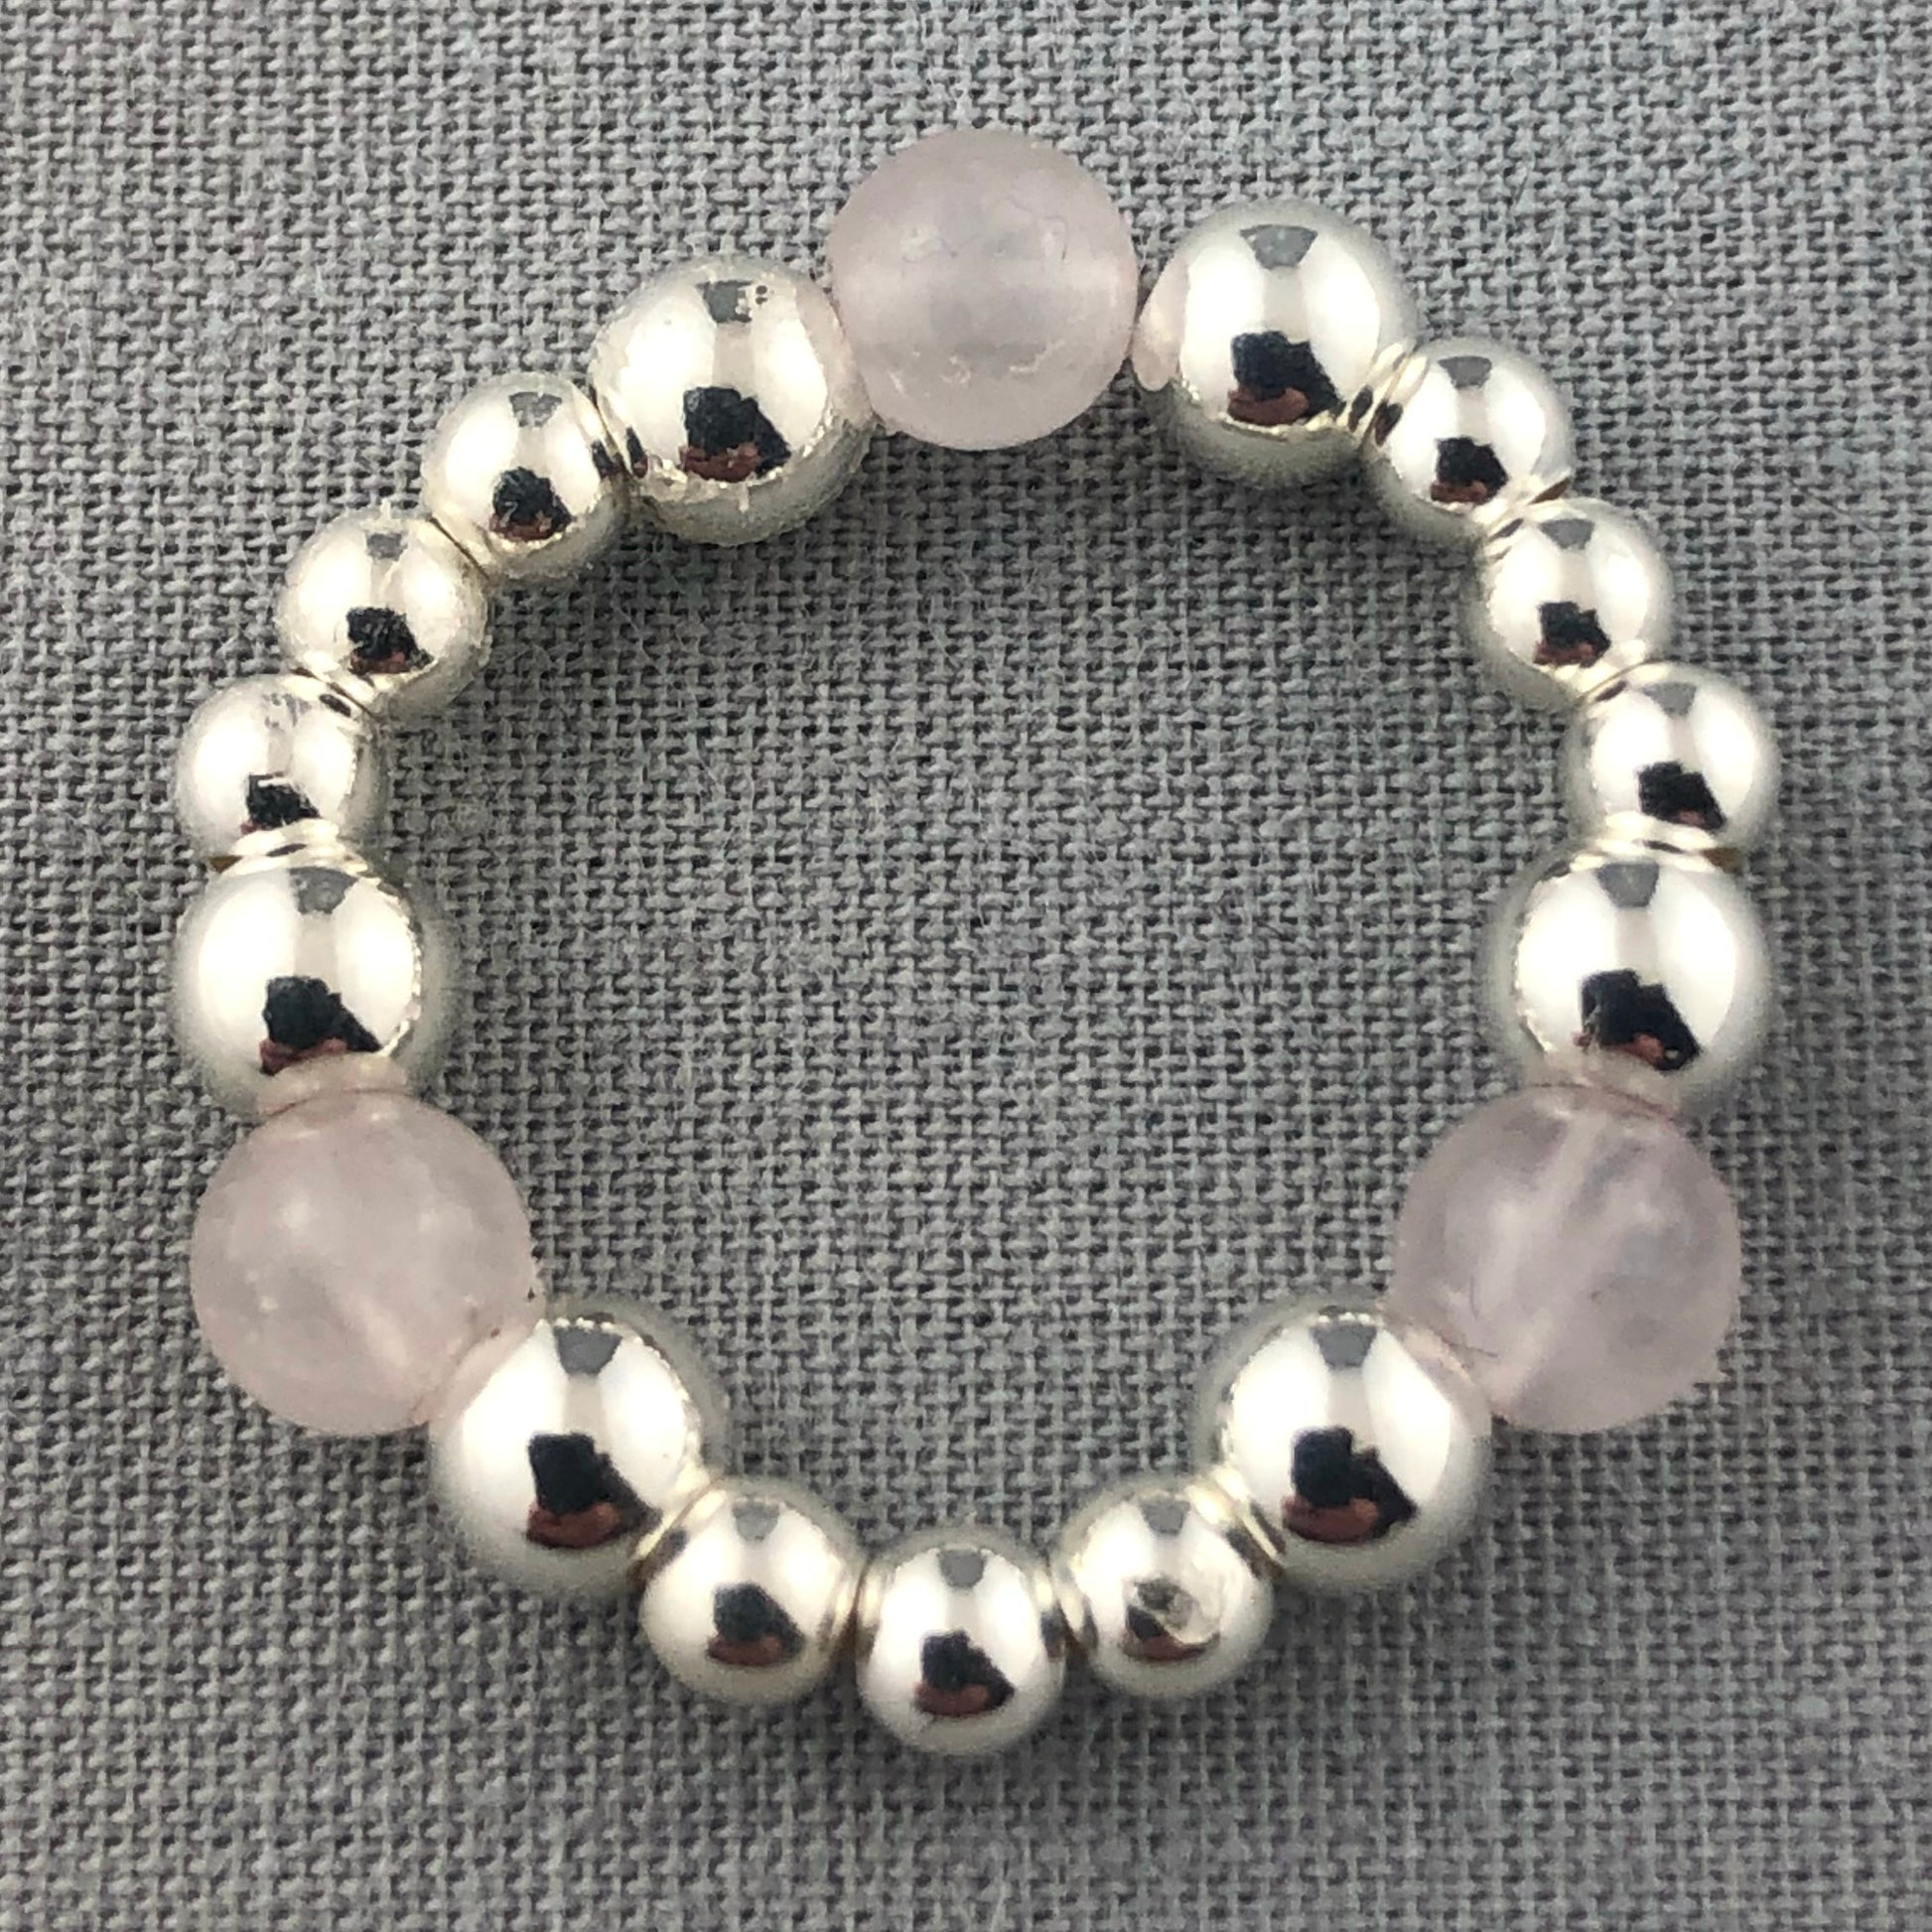 Rose quartz & sterling silver women's bead stacking charm ring by My Silver Wish